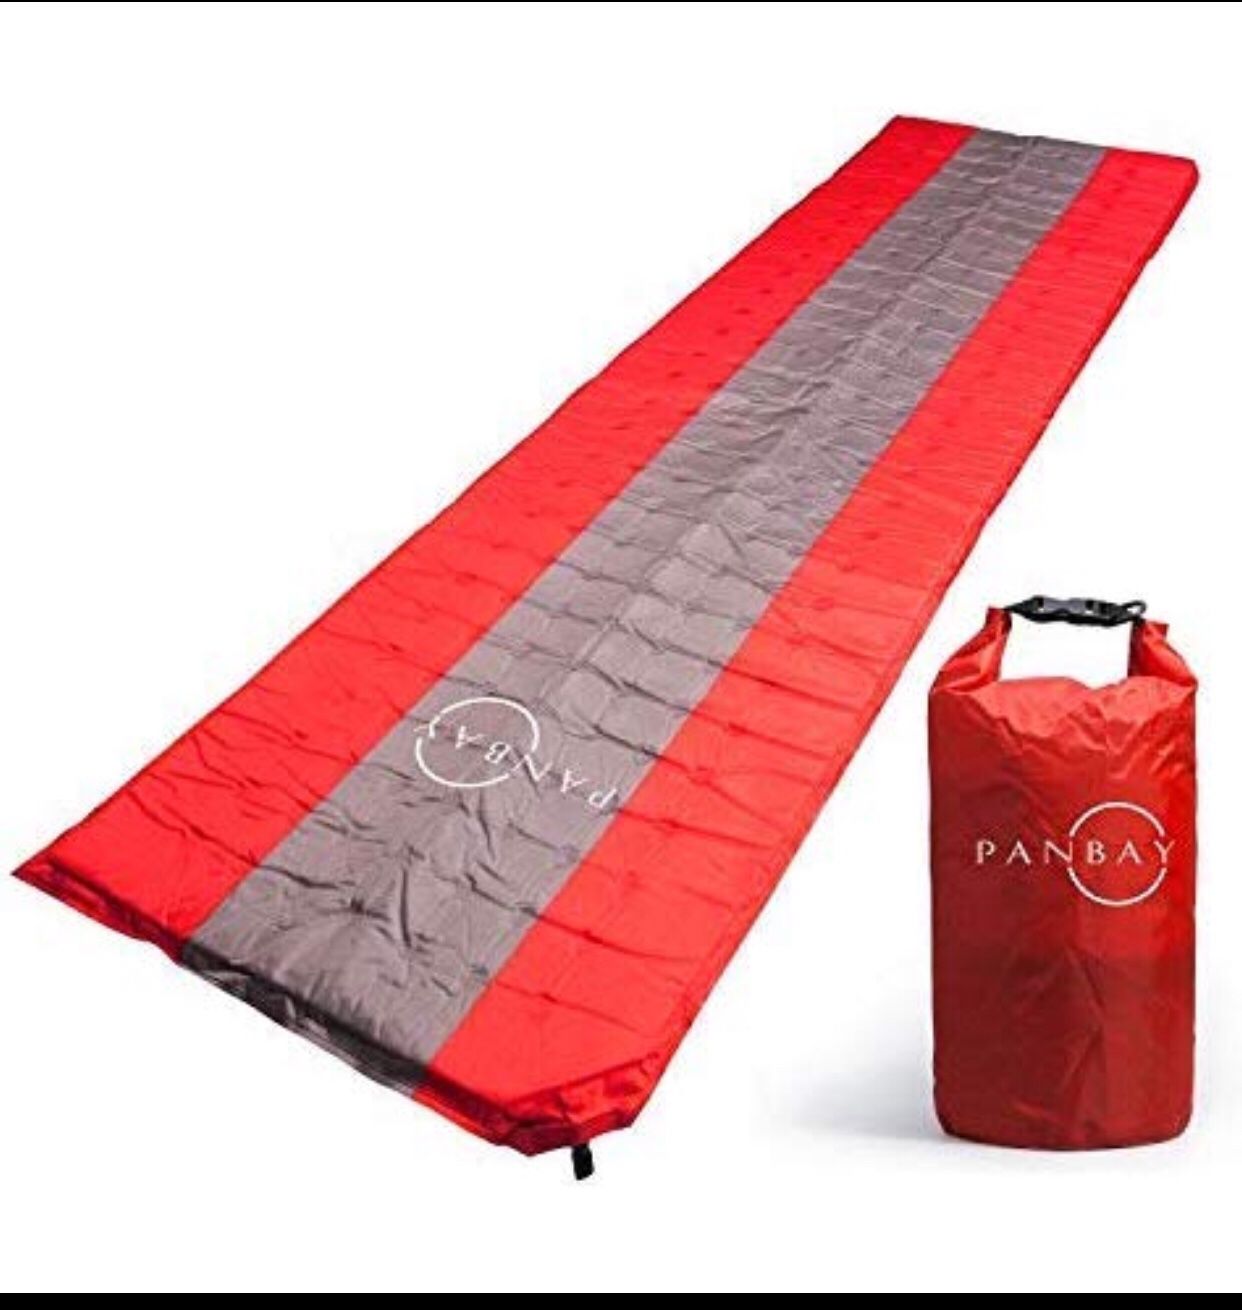 Foldable Ultralight Single Self Inflating Sleeping Pad Mat Inflatable Air Mat Compact for Backpacking, Camping, Travel,Outdoor,Hiking, Camping 